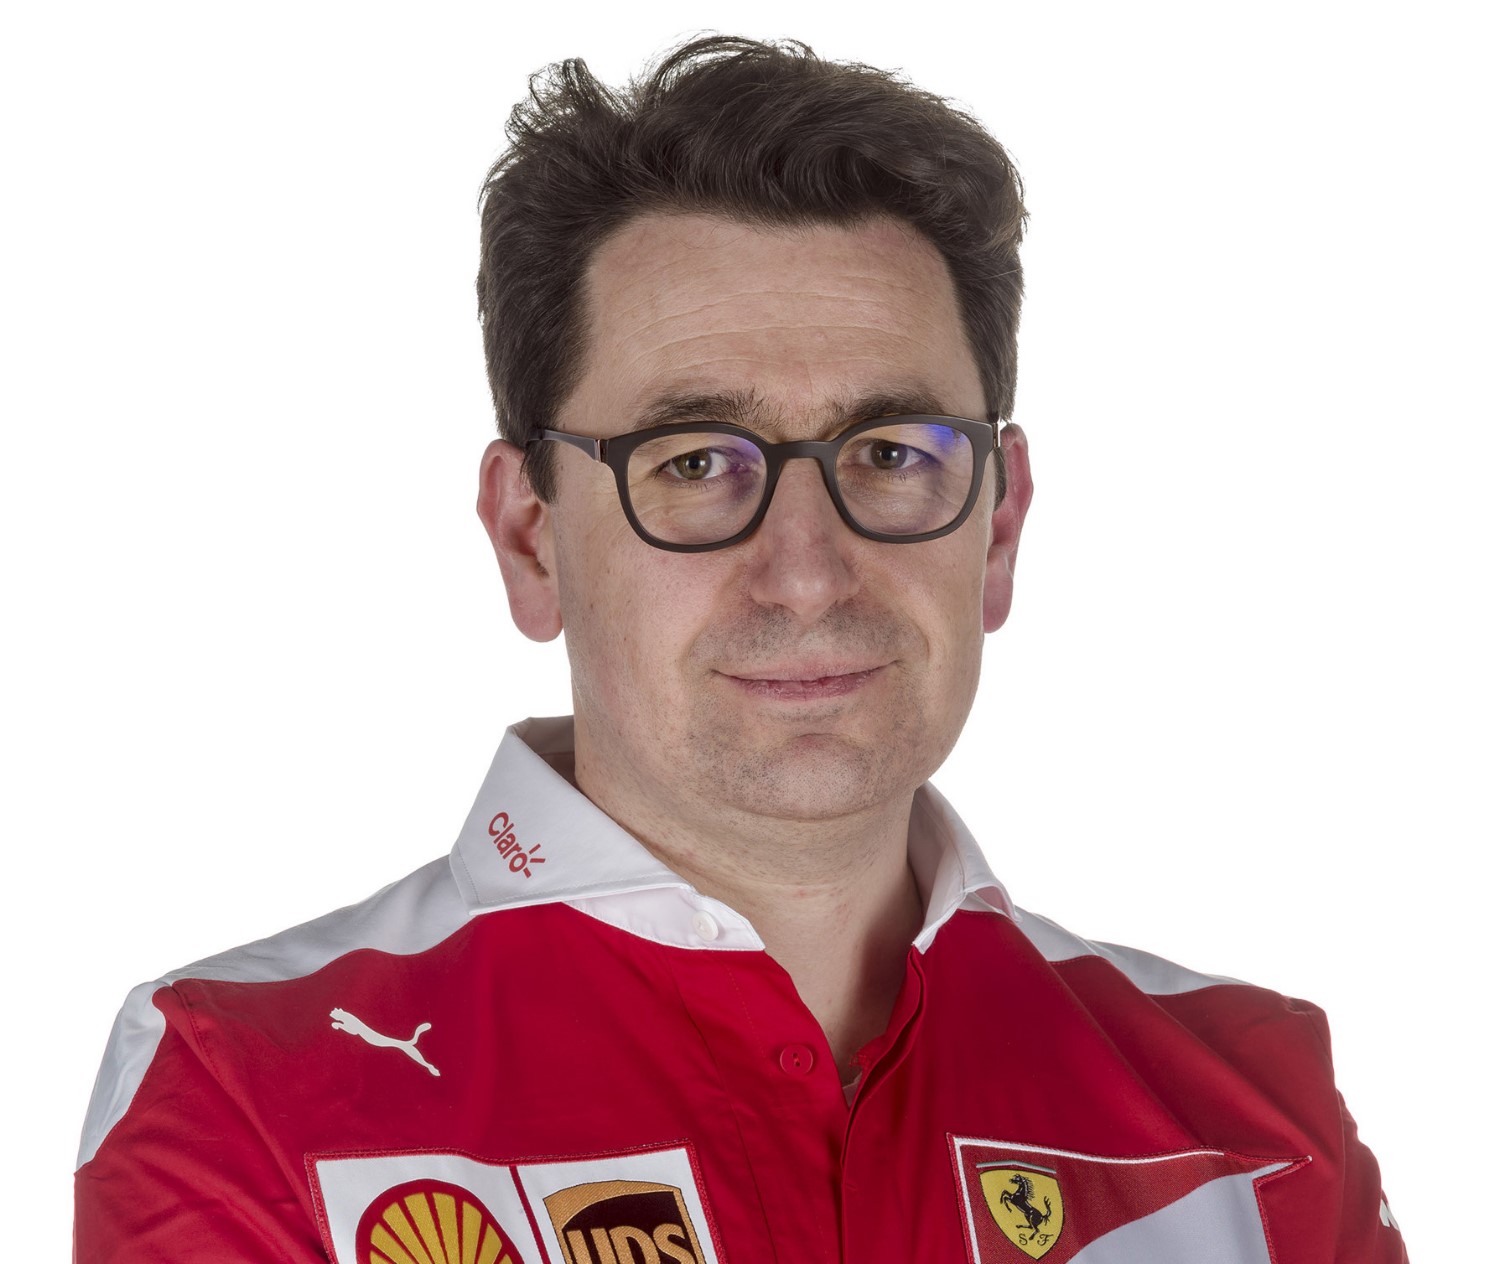 Wolff has nothing to worry about. Ferrari put an engine man (Binotto) in charge of chassis development